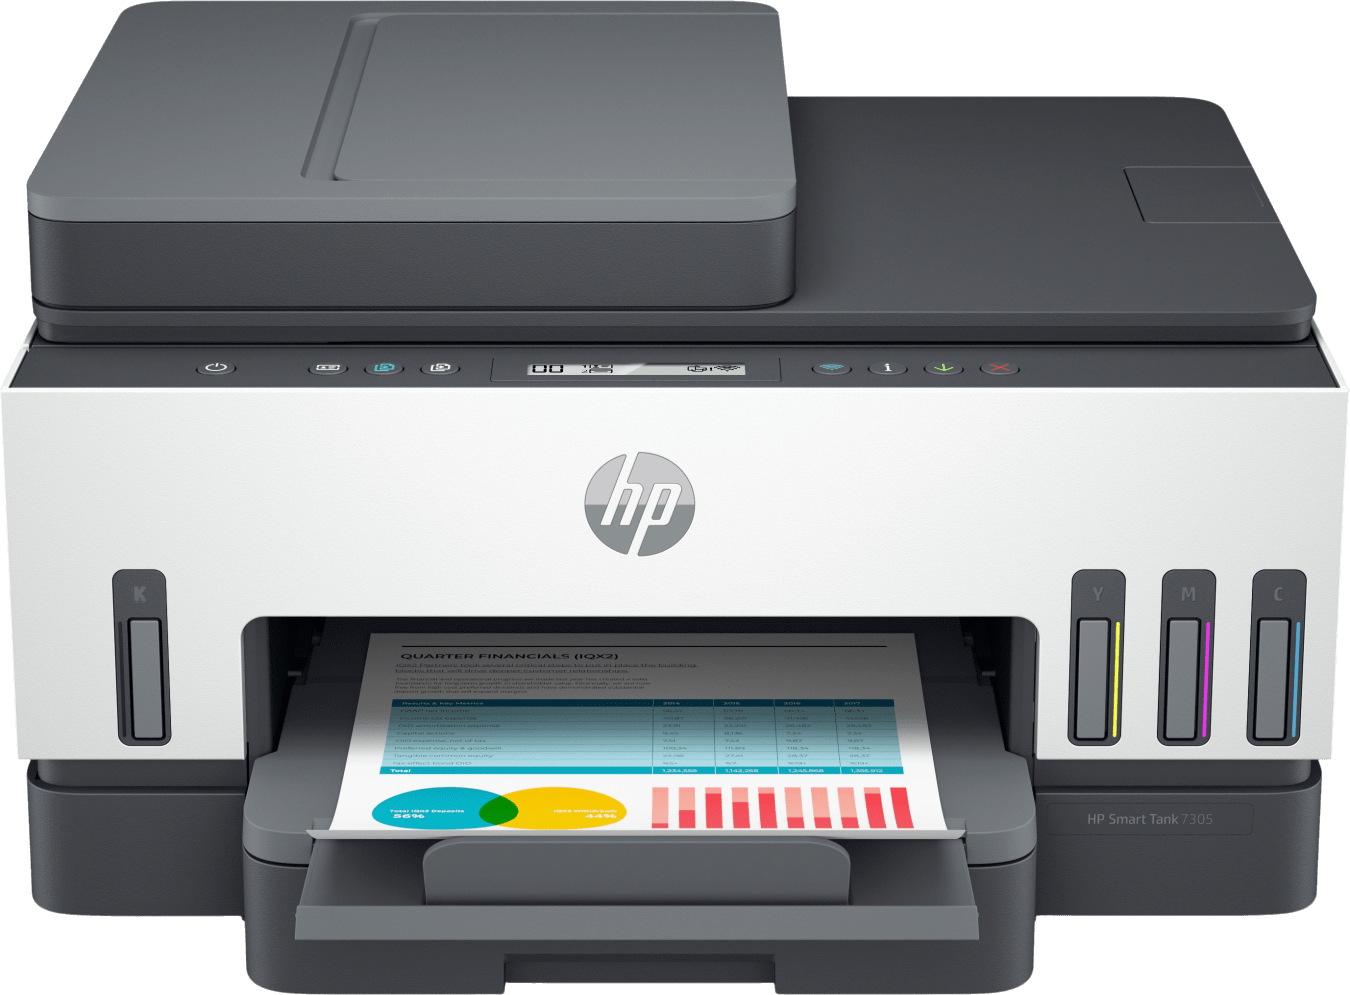 HP Smart Tank 7305 All-in-One Printer